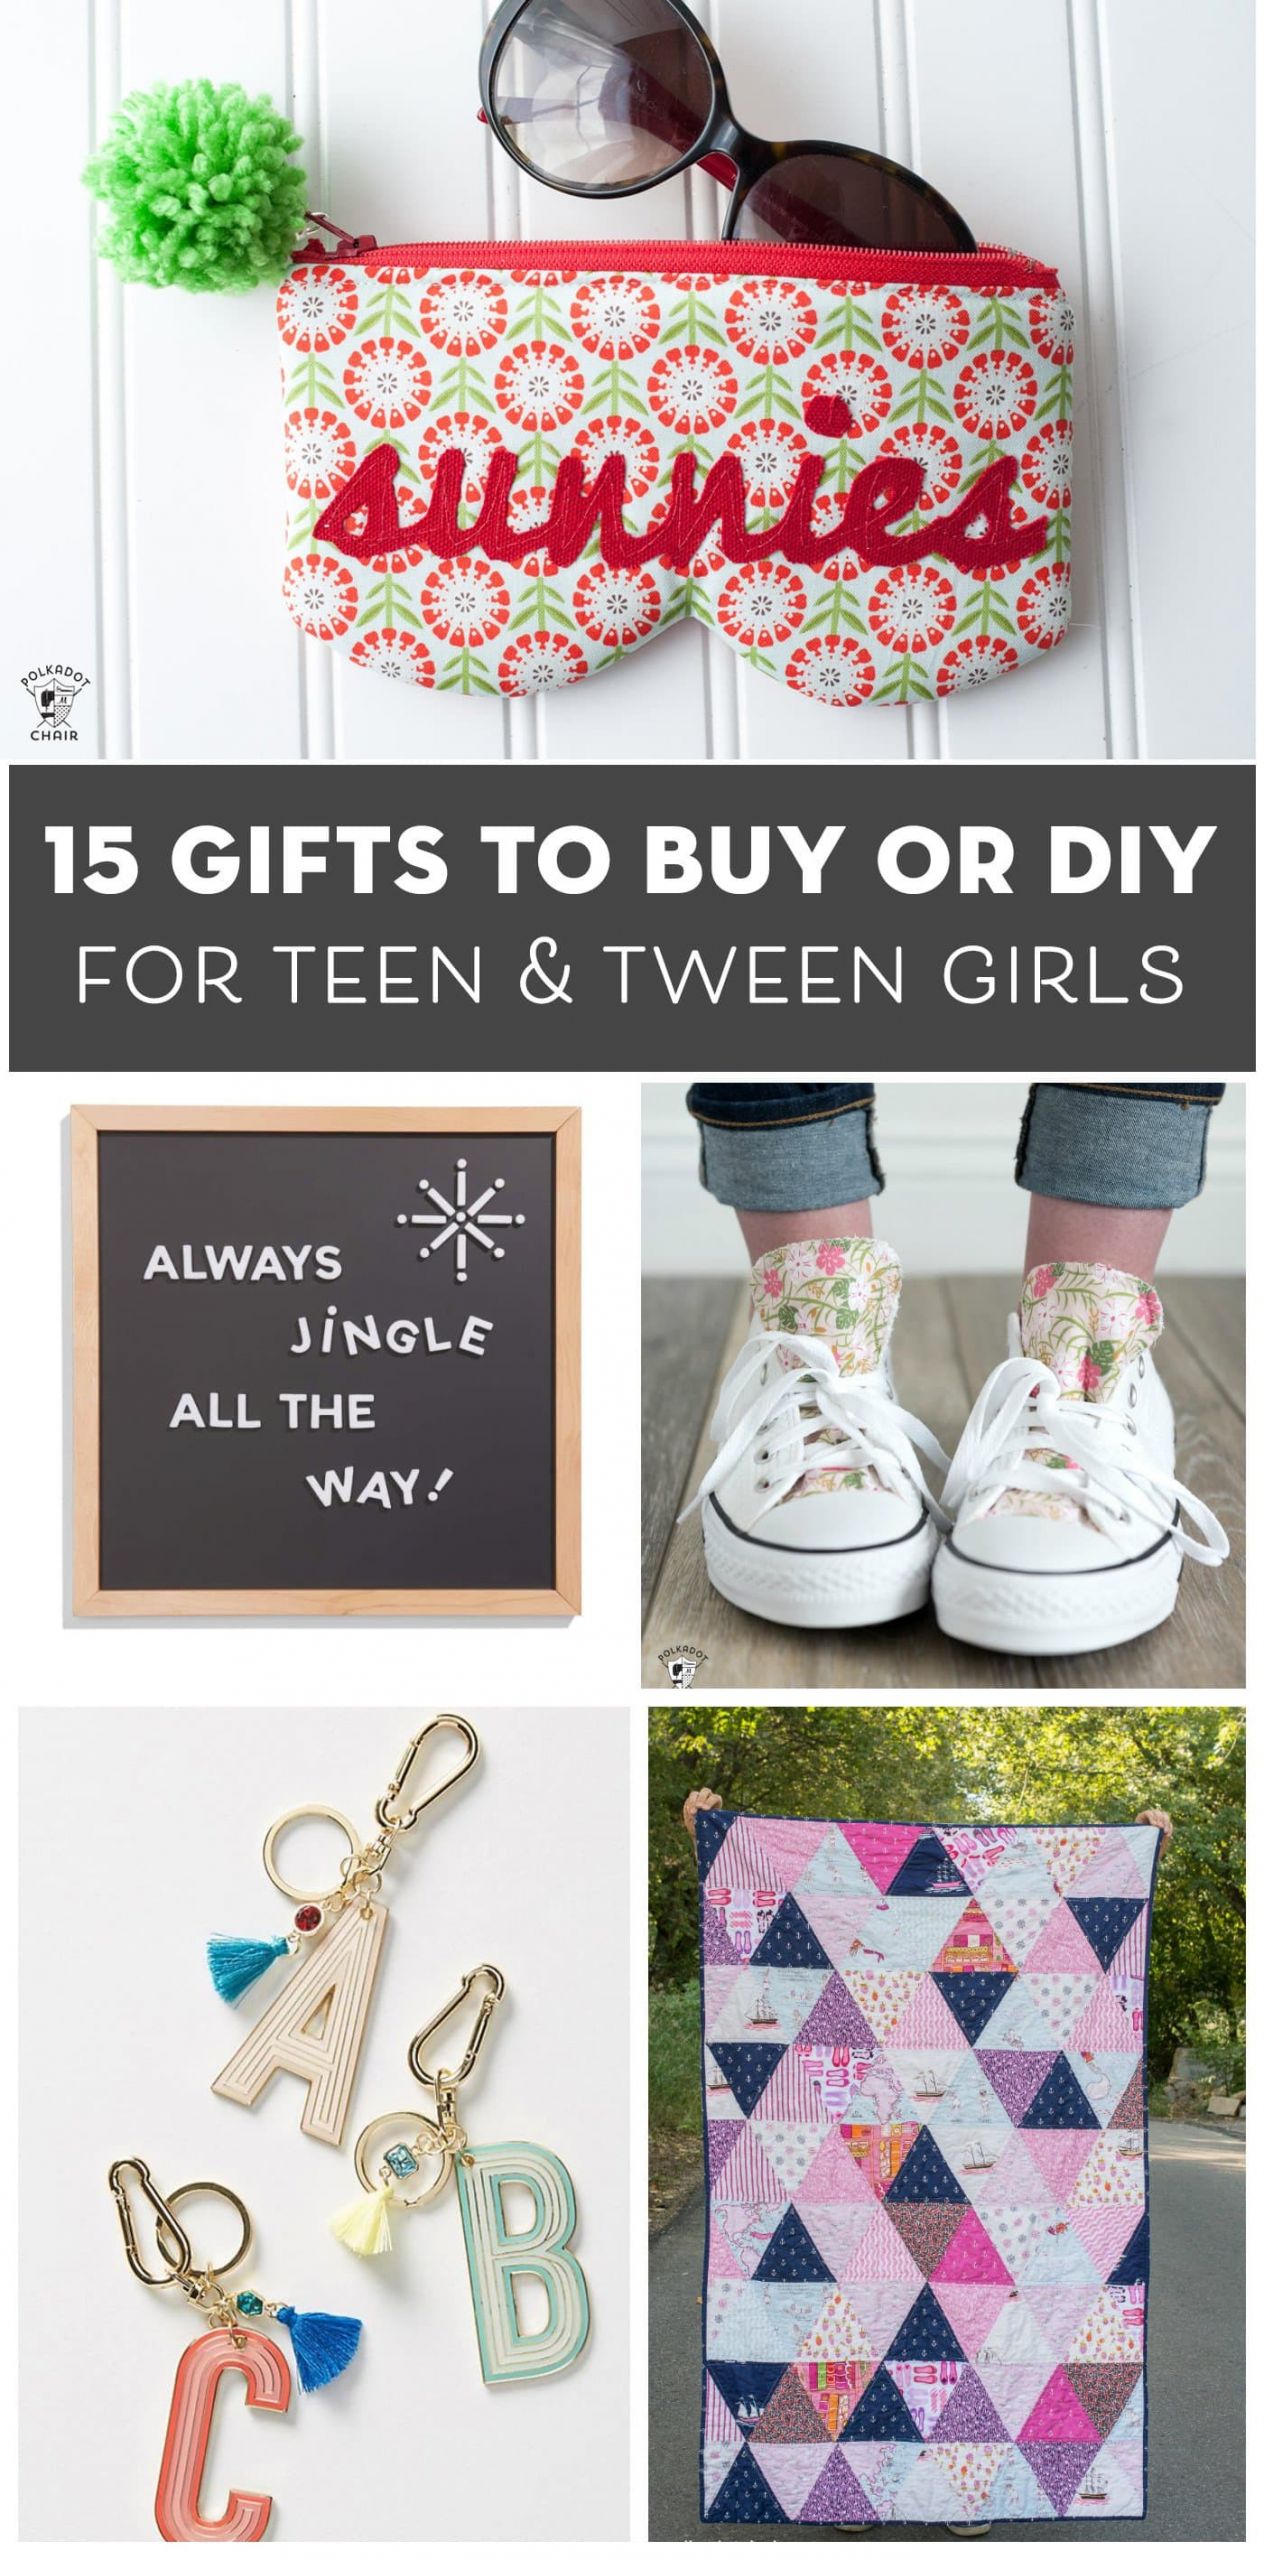 Gift Ideas Teenage Girls
 15 Gift Ideas for Teenage Girls That You Can DIY or Buy